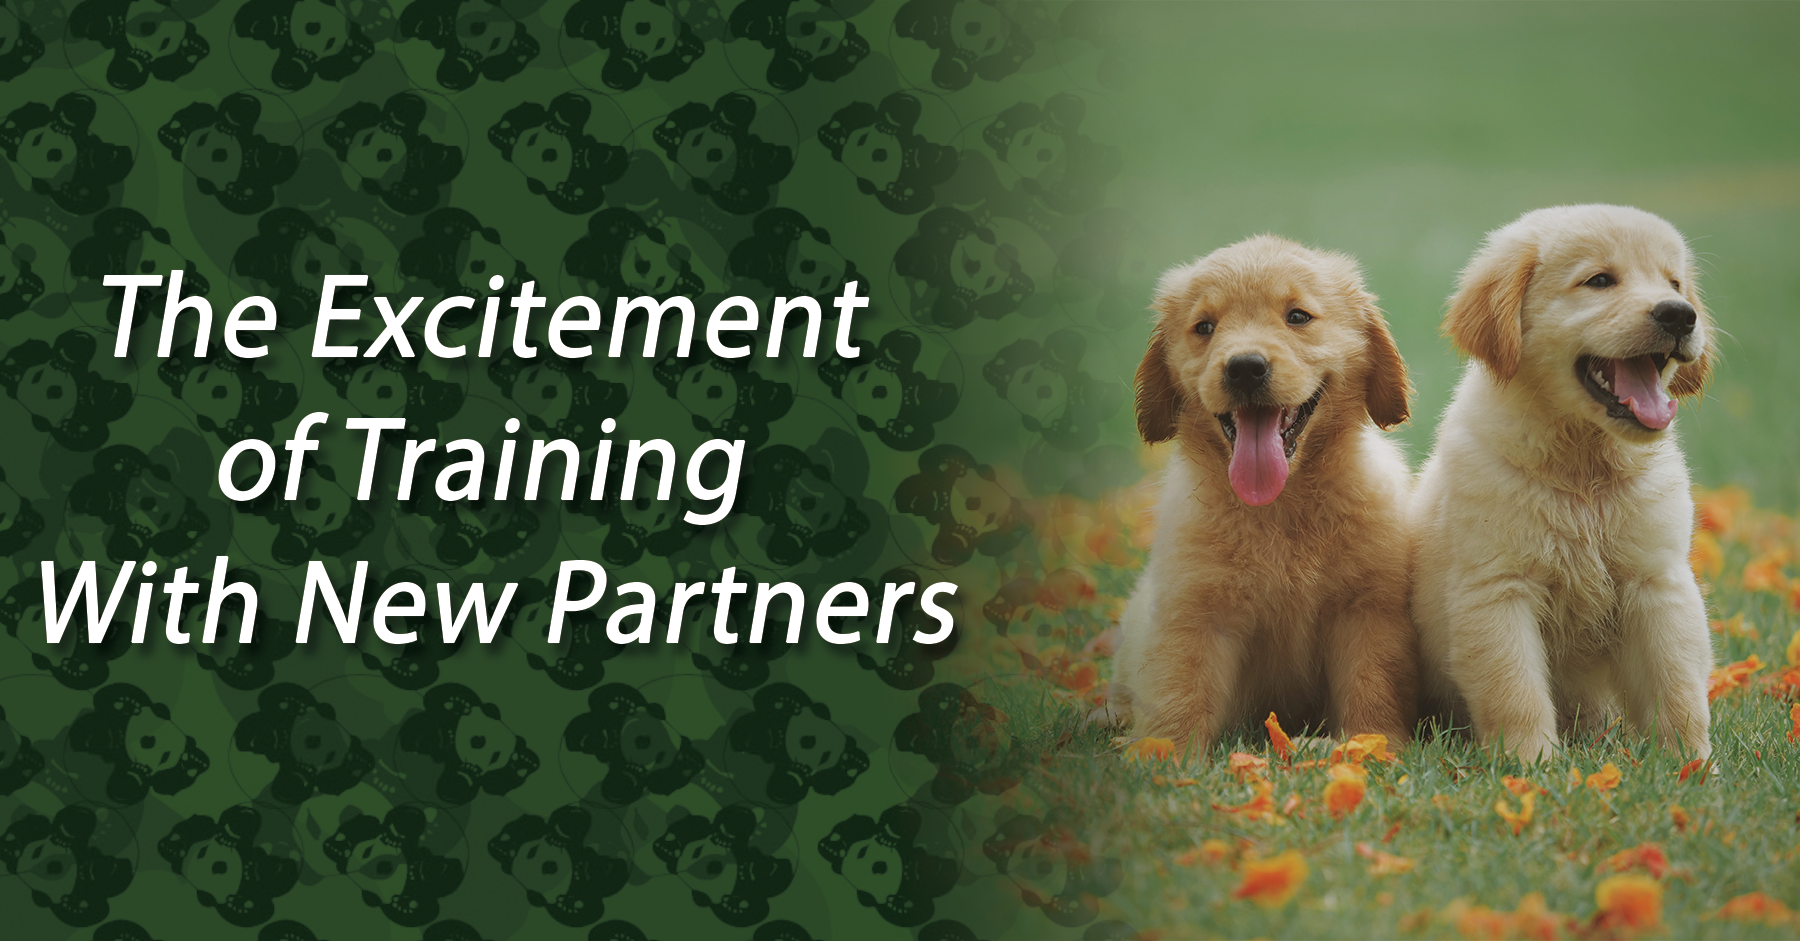 The Excitement of Training With New Partners